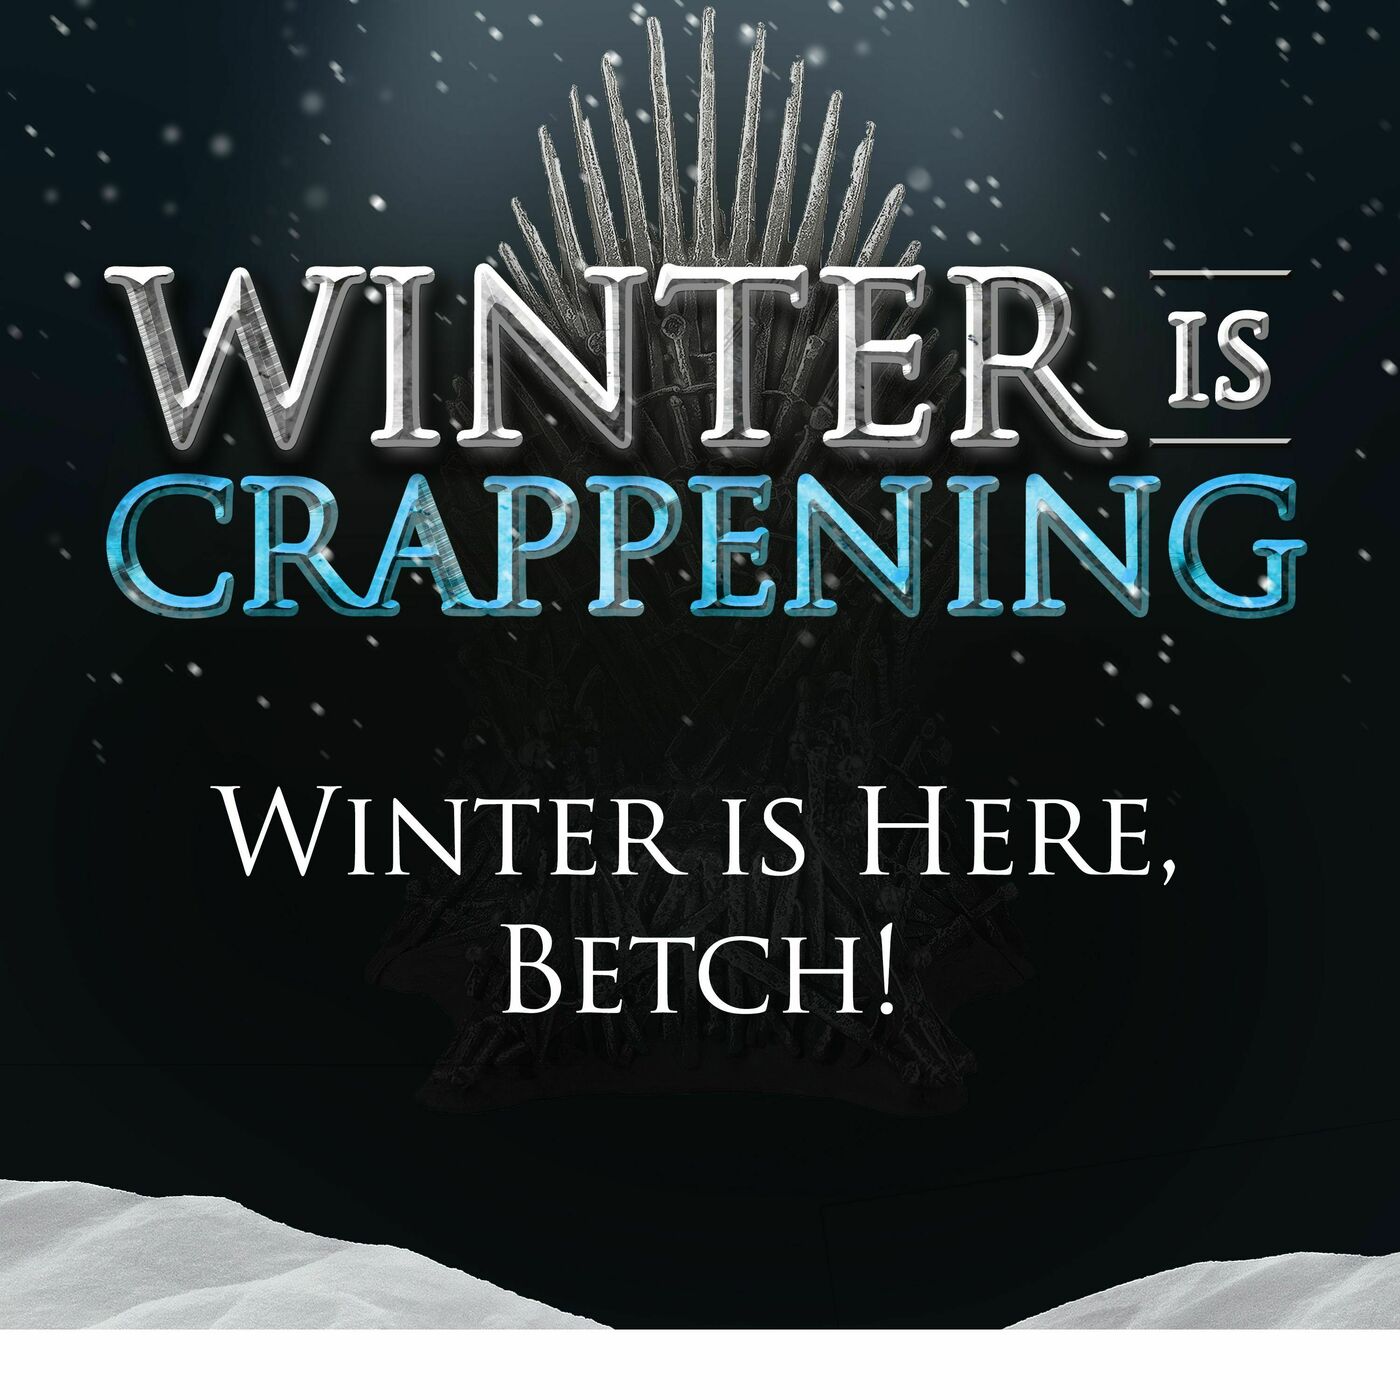 Winter is Here, Betch!